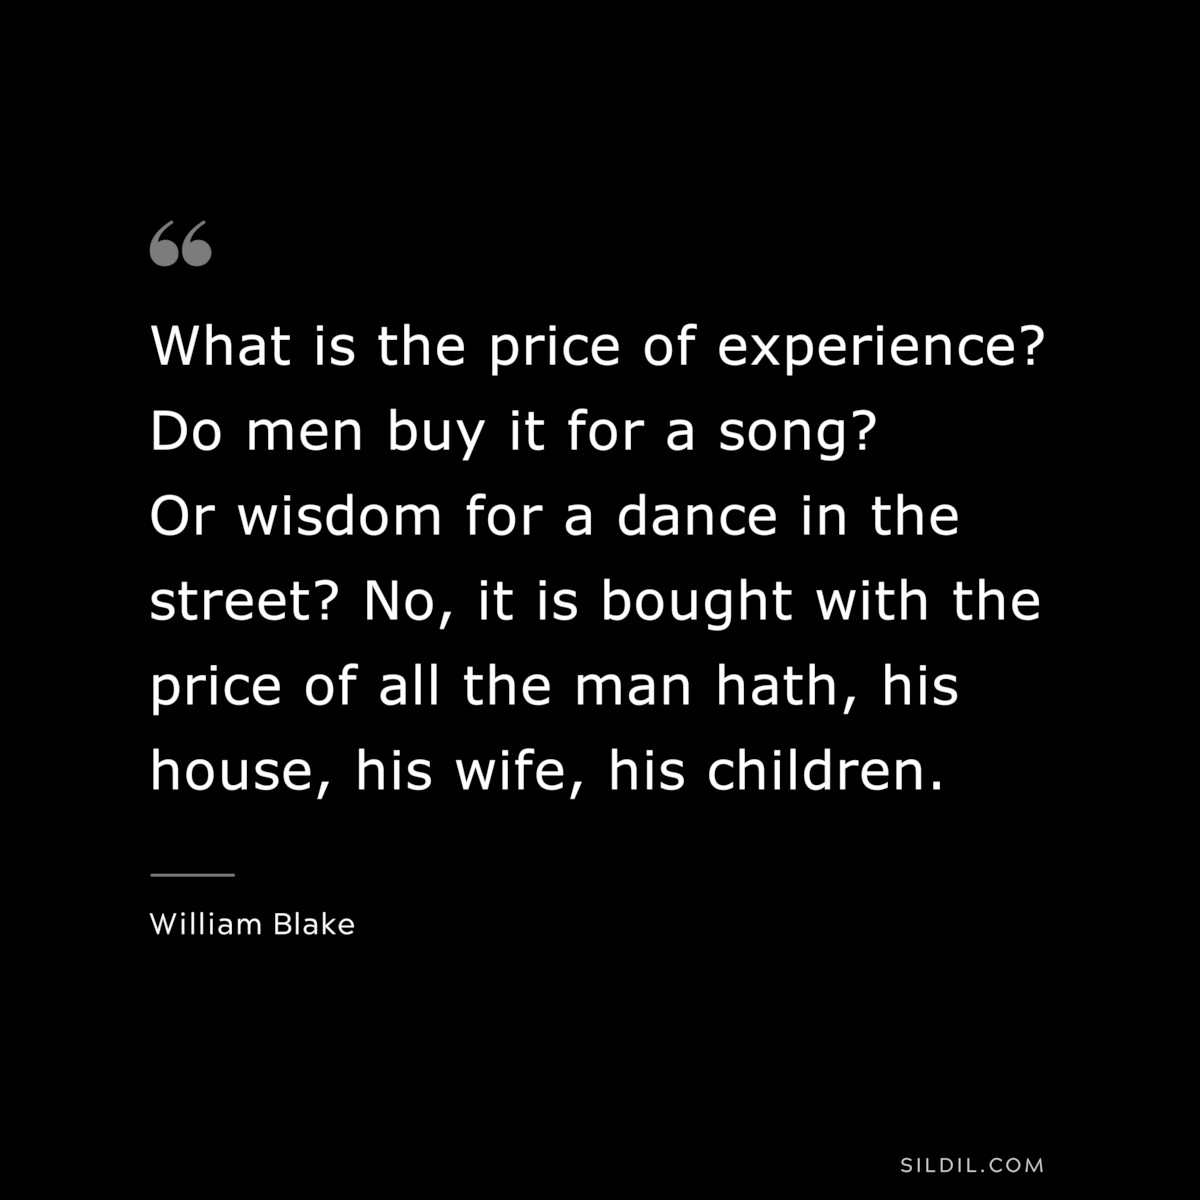 What is the price of experience? Do men buy it for a song? Or wisdom for a dance in the street? No, it is bought with the price of all the man hath, his house, his wife, his children. ― William Blake